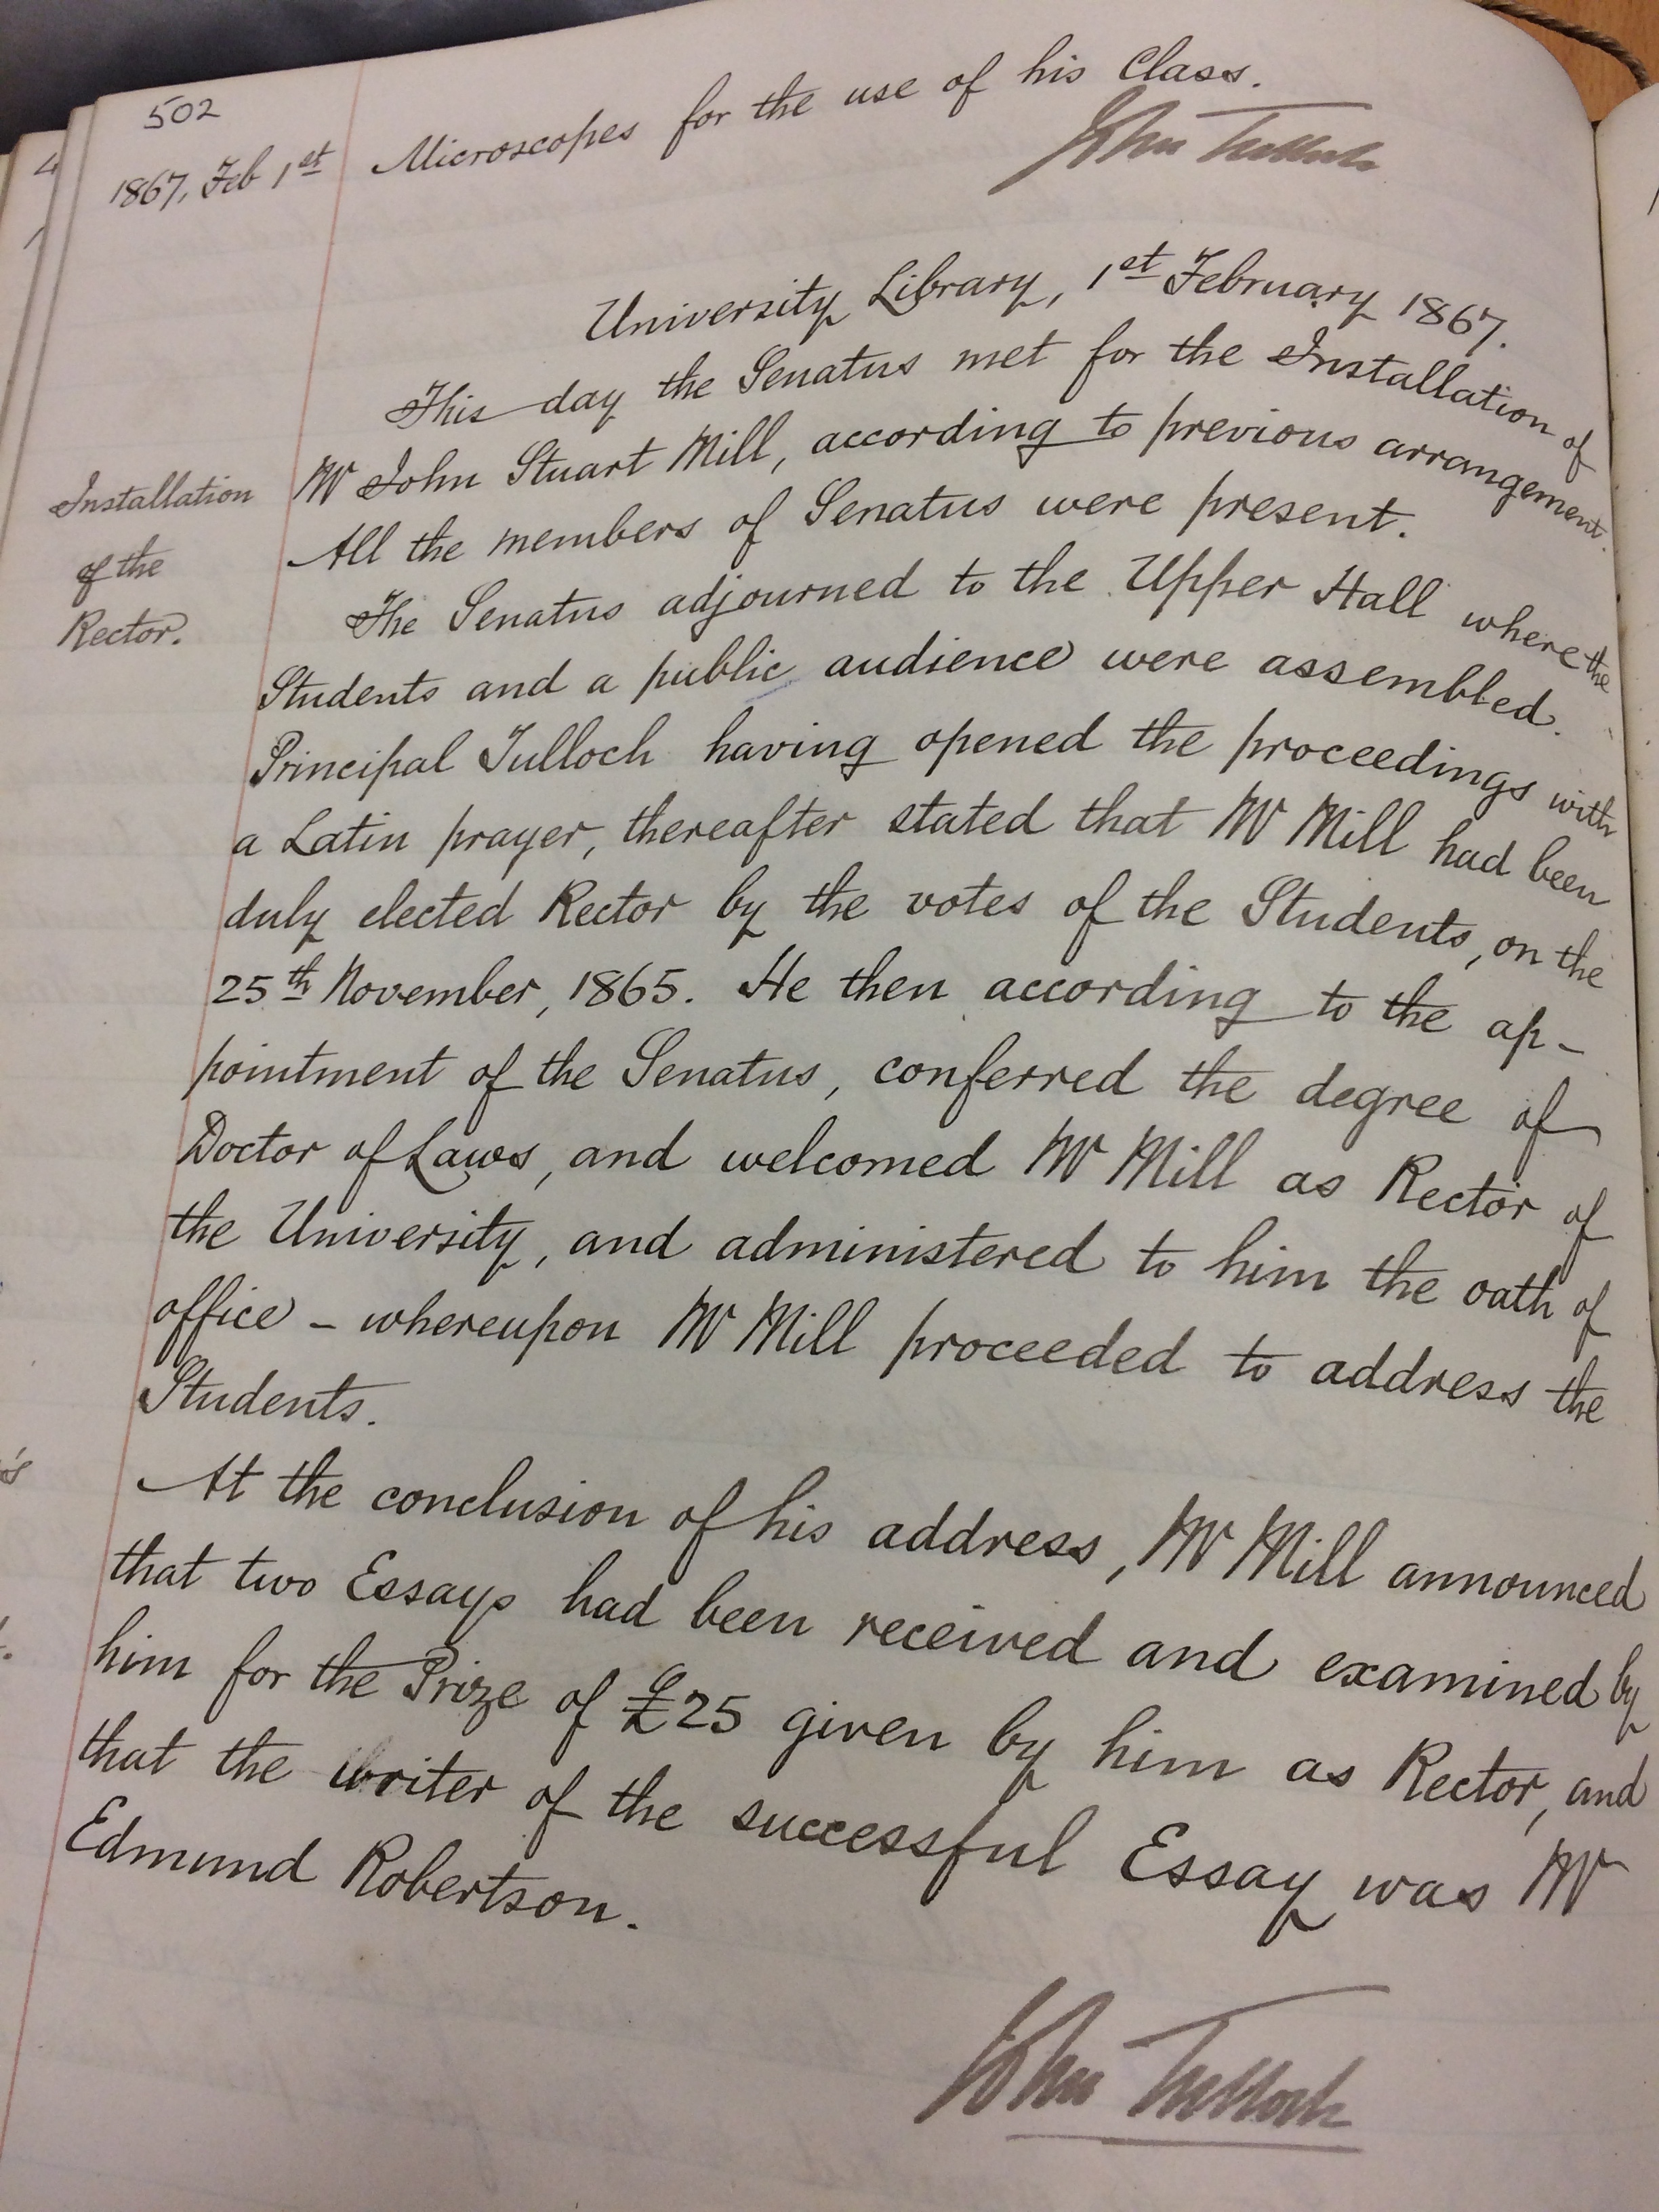 Page from the minutes of Senatus for 1 February 1867, recording the installation of Mill as Rector, the conferral of his LLD and the delivery of his inaugural address.